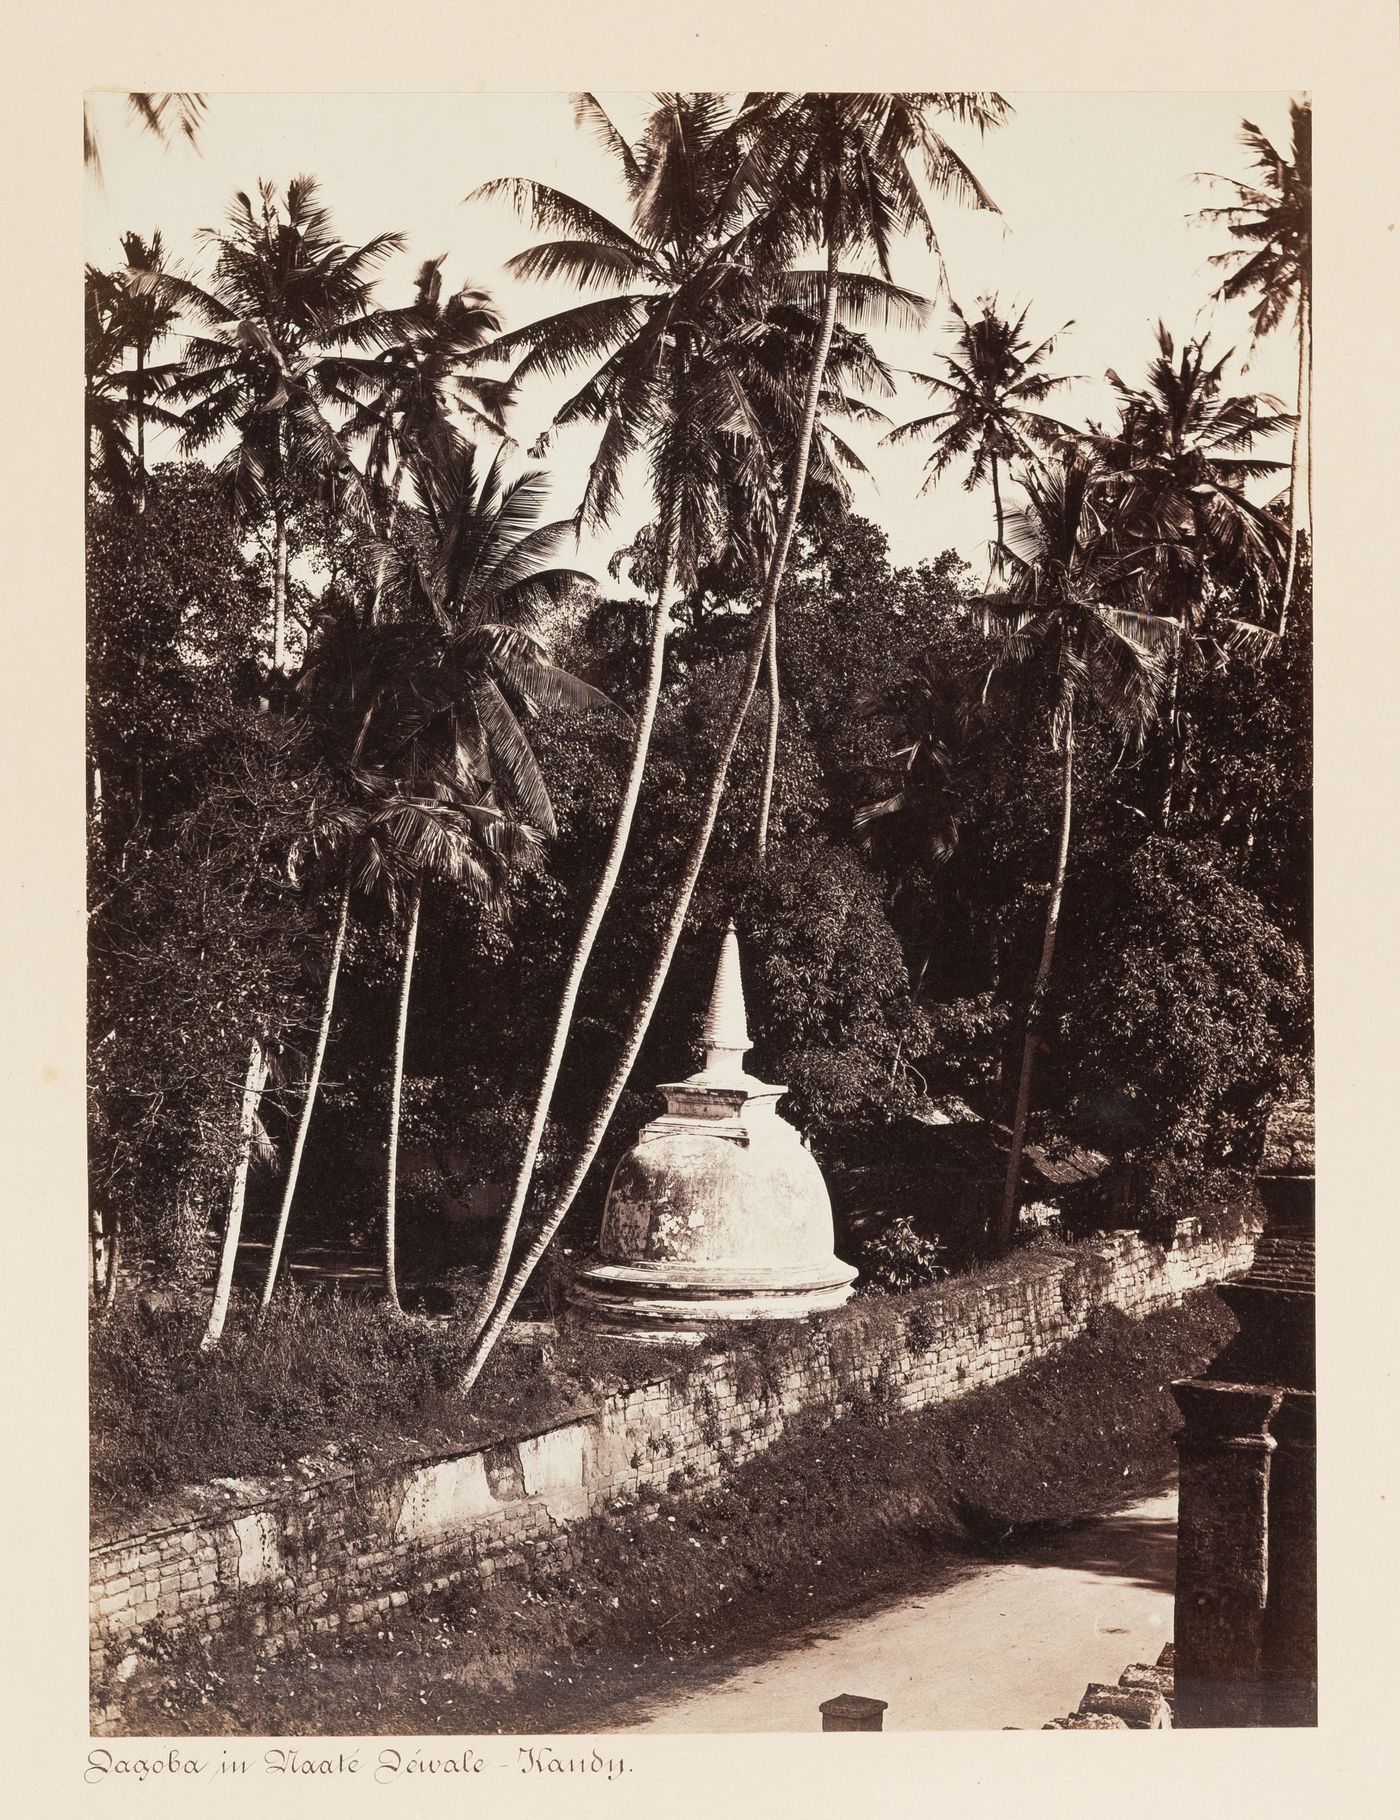 View of a dagoba, beside the Temple of the Tooth (also known as the Sri Dalada Maligawa), Kandy, Ceylon (now Sri Lanka)